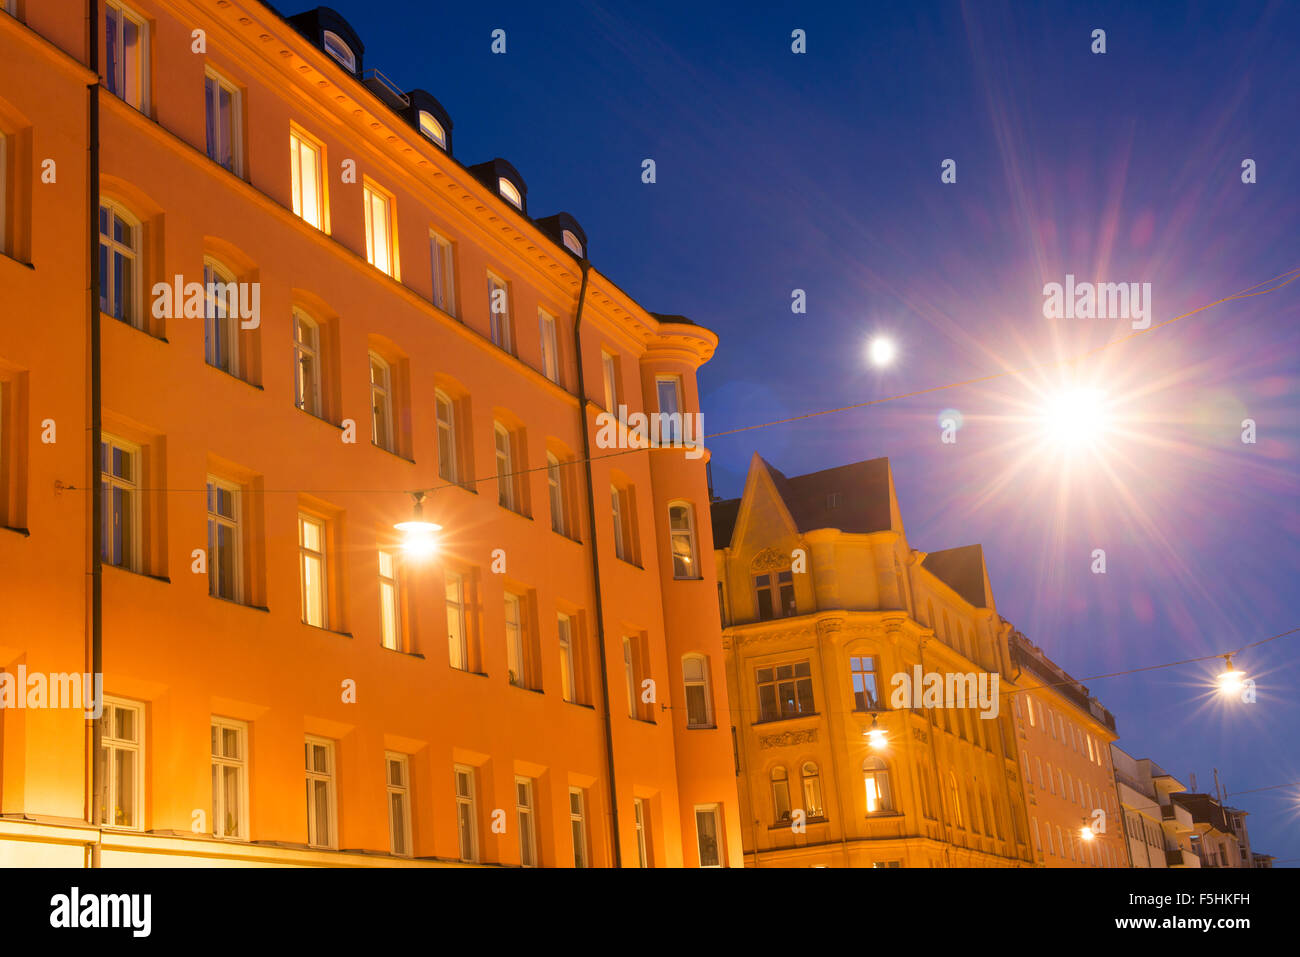 Sweden, Uppland, Stockholm, Residential buildings in old town Stock Photo